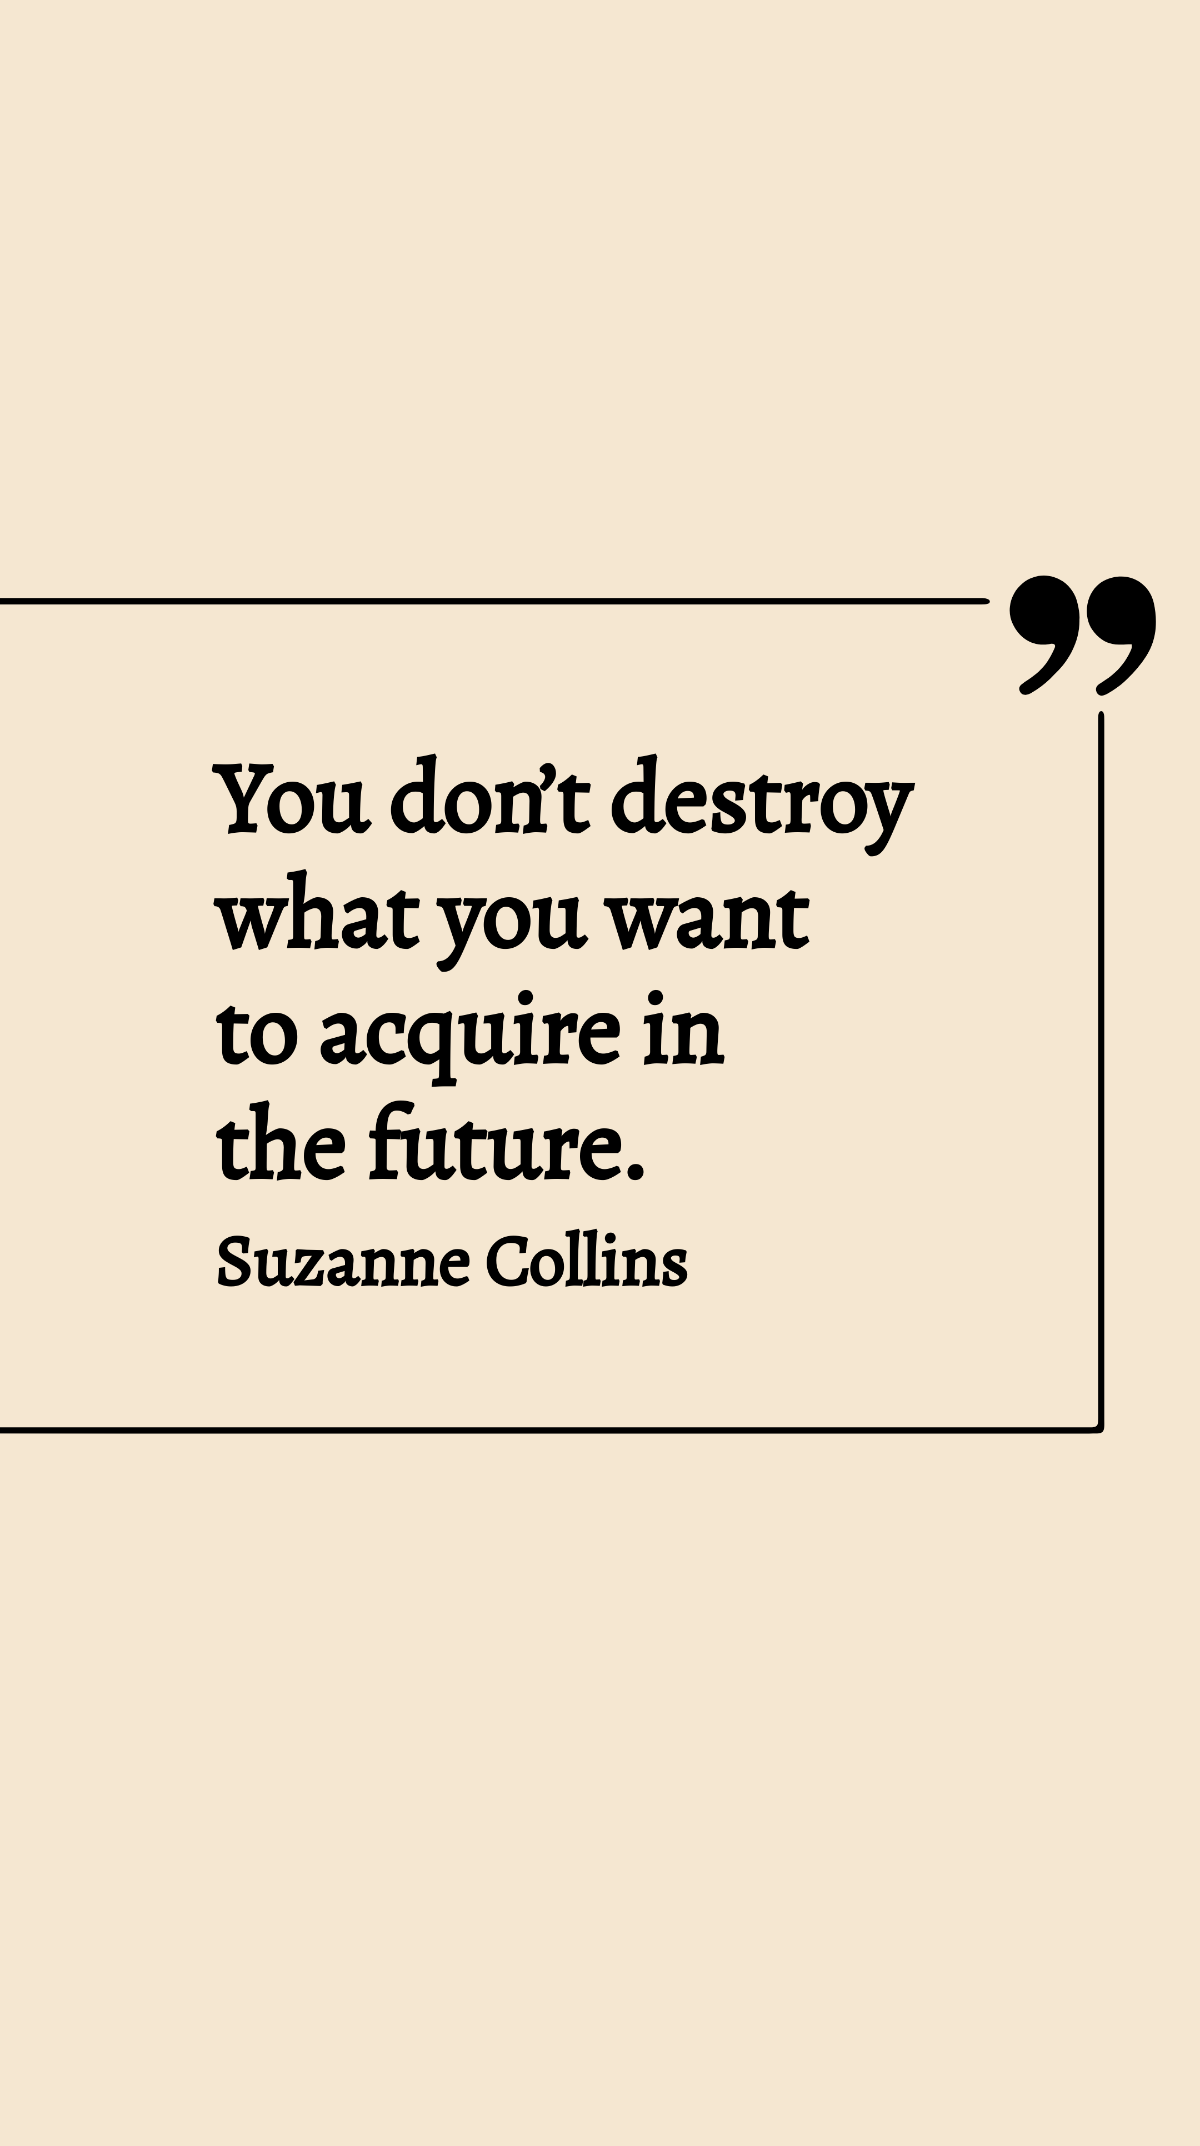 Suzanne Collins - You don’t destroy what you want to acquire in the future.